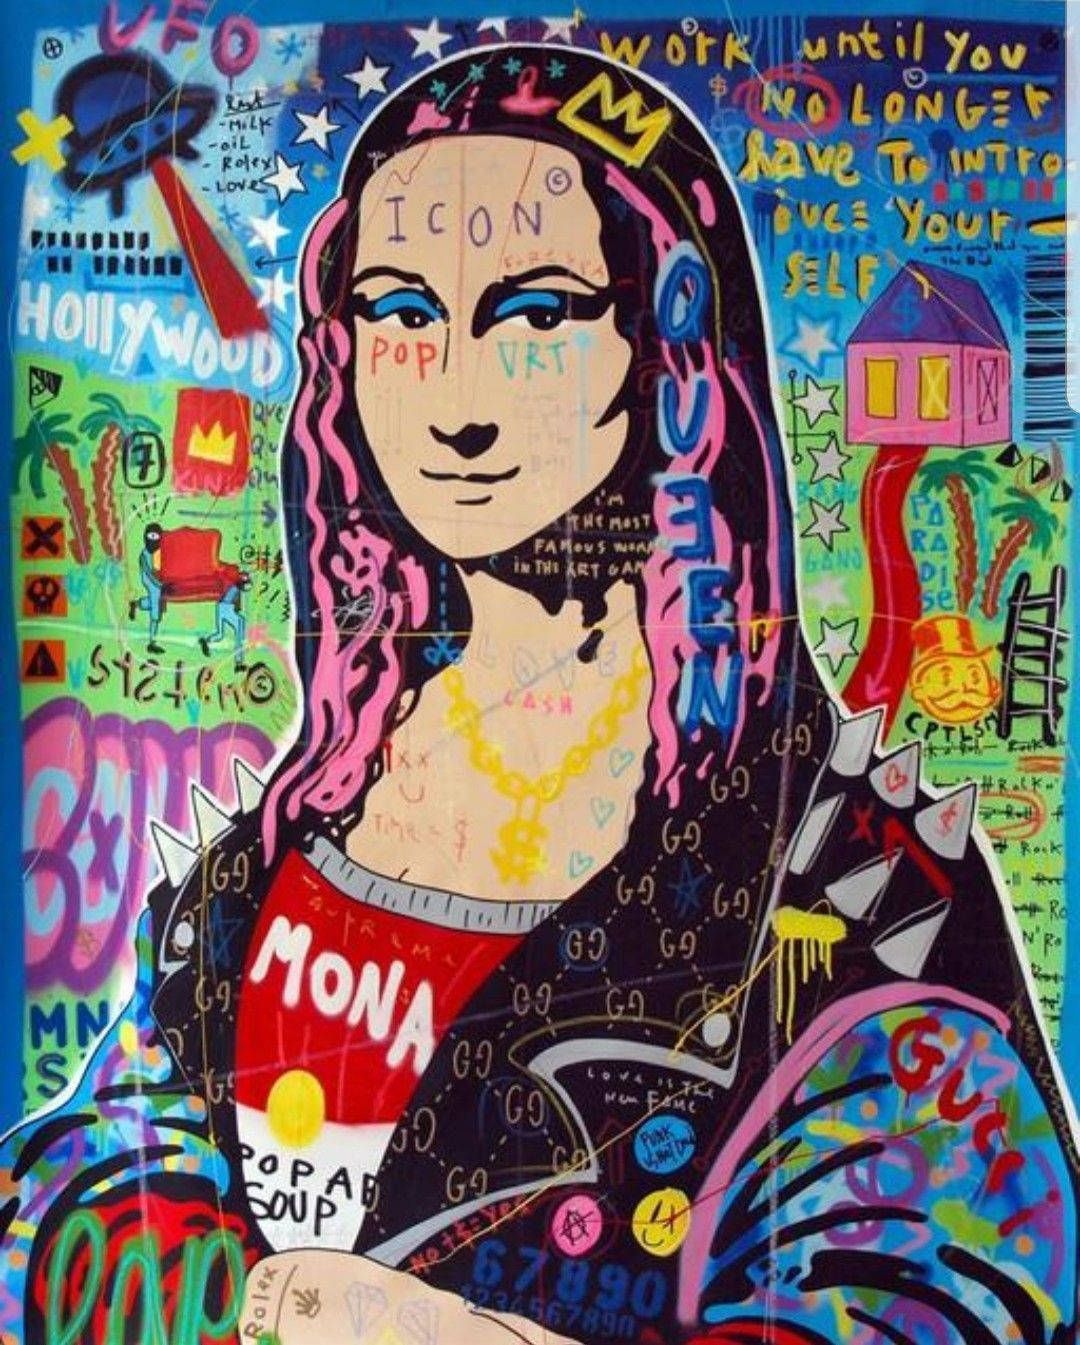 A painting of Mona Lisa wearing a red Mona Lisa shirt and a yellow cross necklace. - Mona Lisa